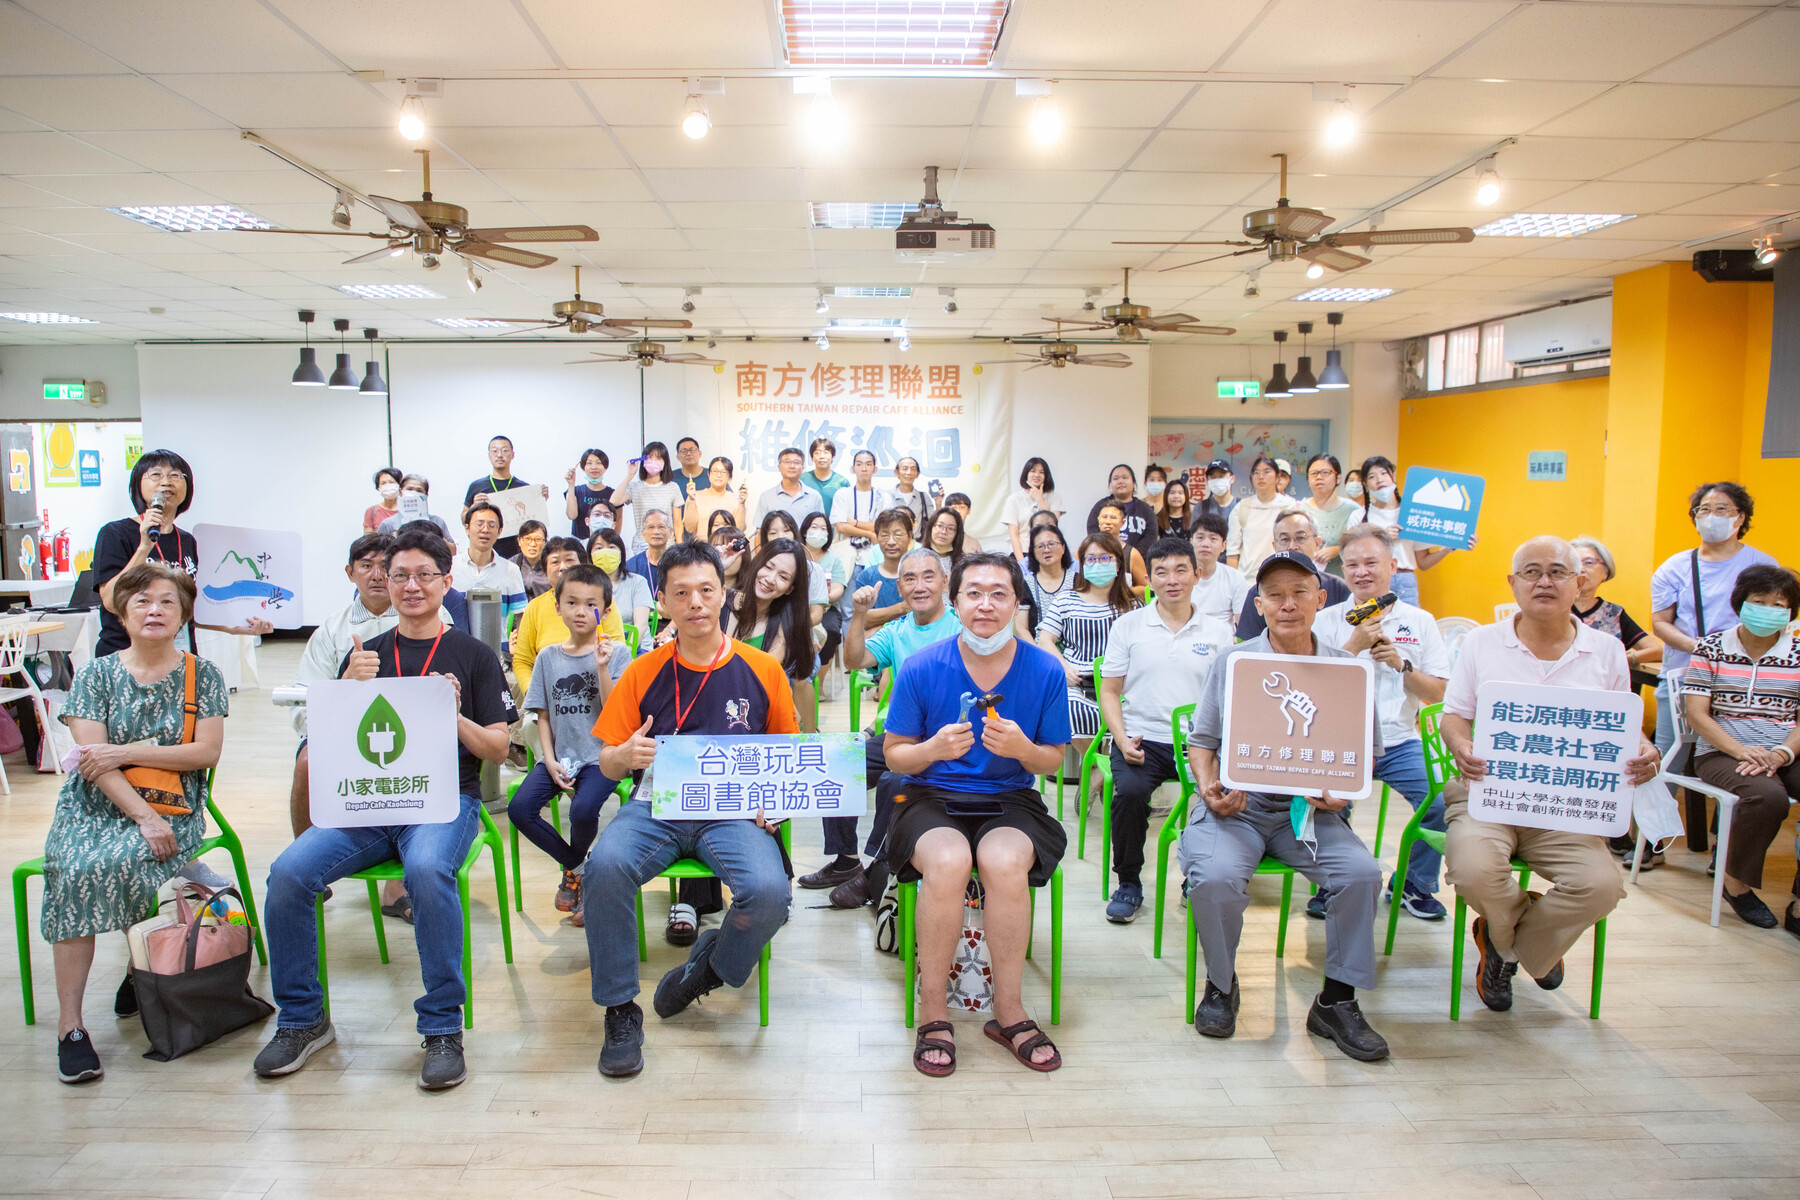 The Yancheng Repair Café Opening & Repair Session at Jhongsiao Elementary School